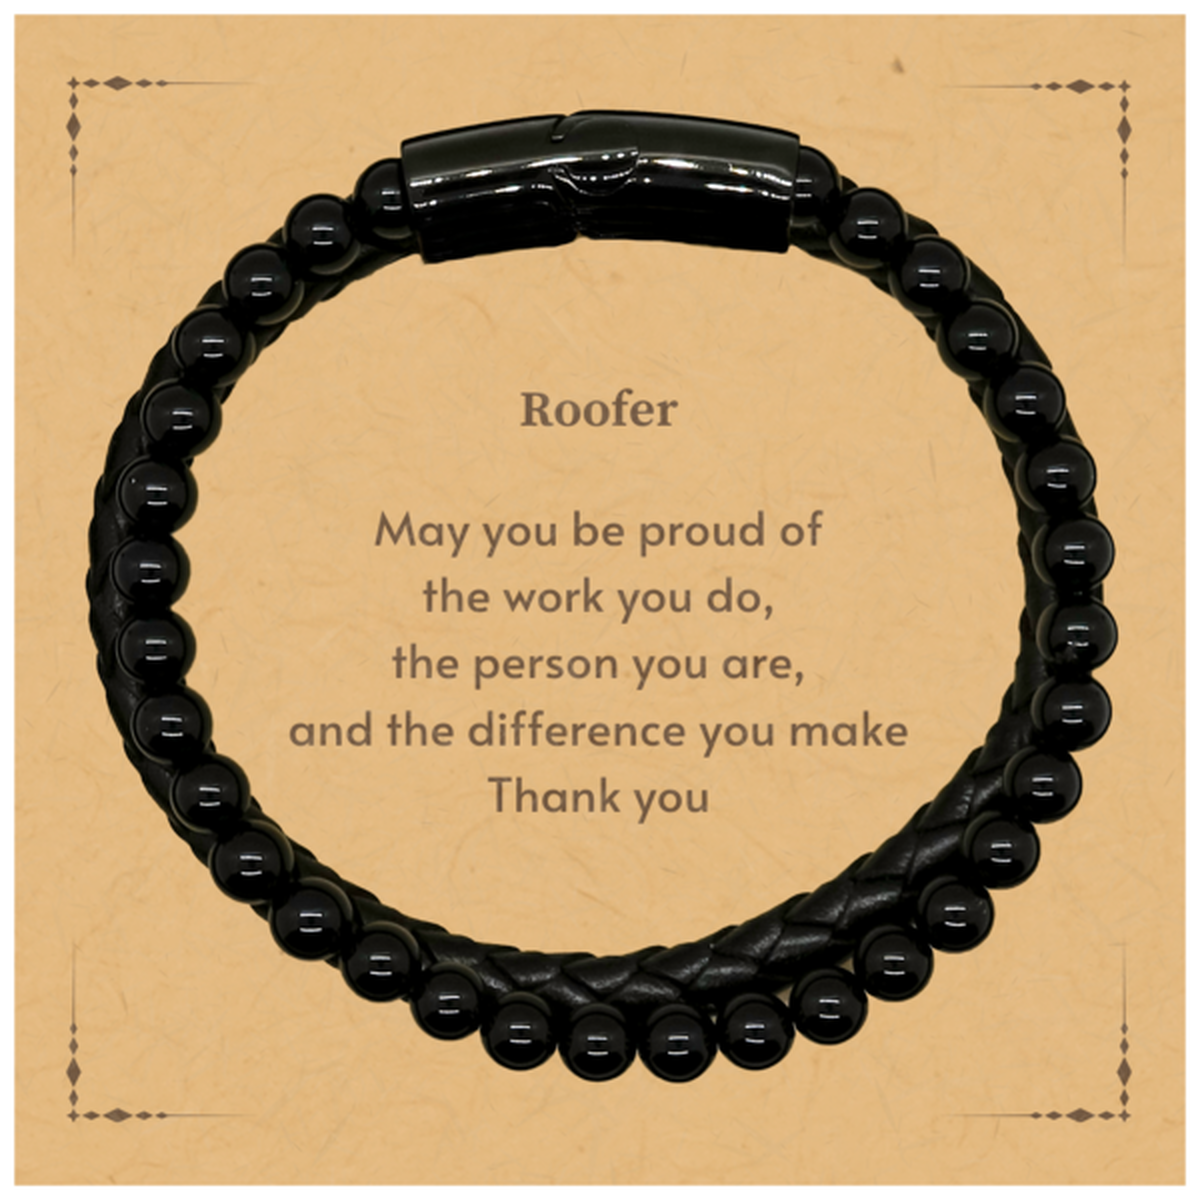 Heartwarming Stone Leather Bracelets Retirement Coworkers Gifts for Roofer, Roofer May You be proud of the work you do, the person you are Gifts for Boss Men Women Friends